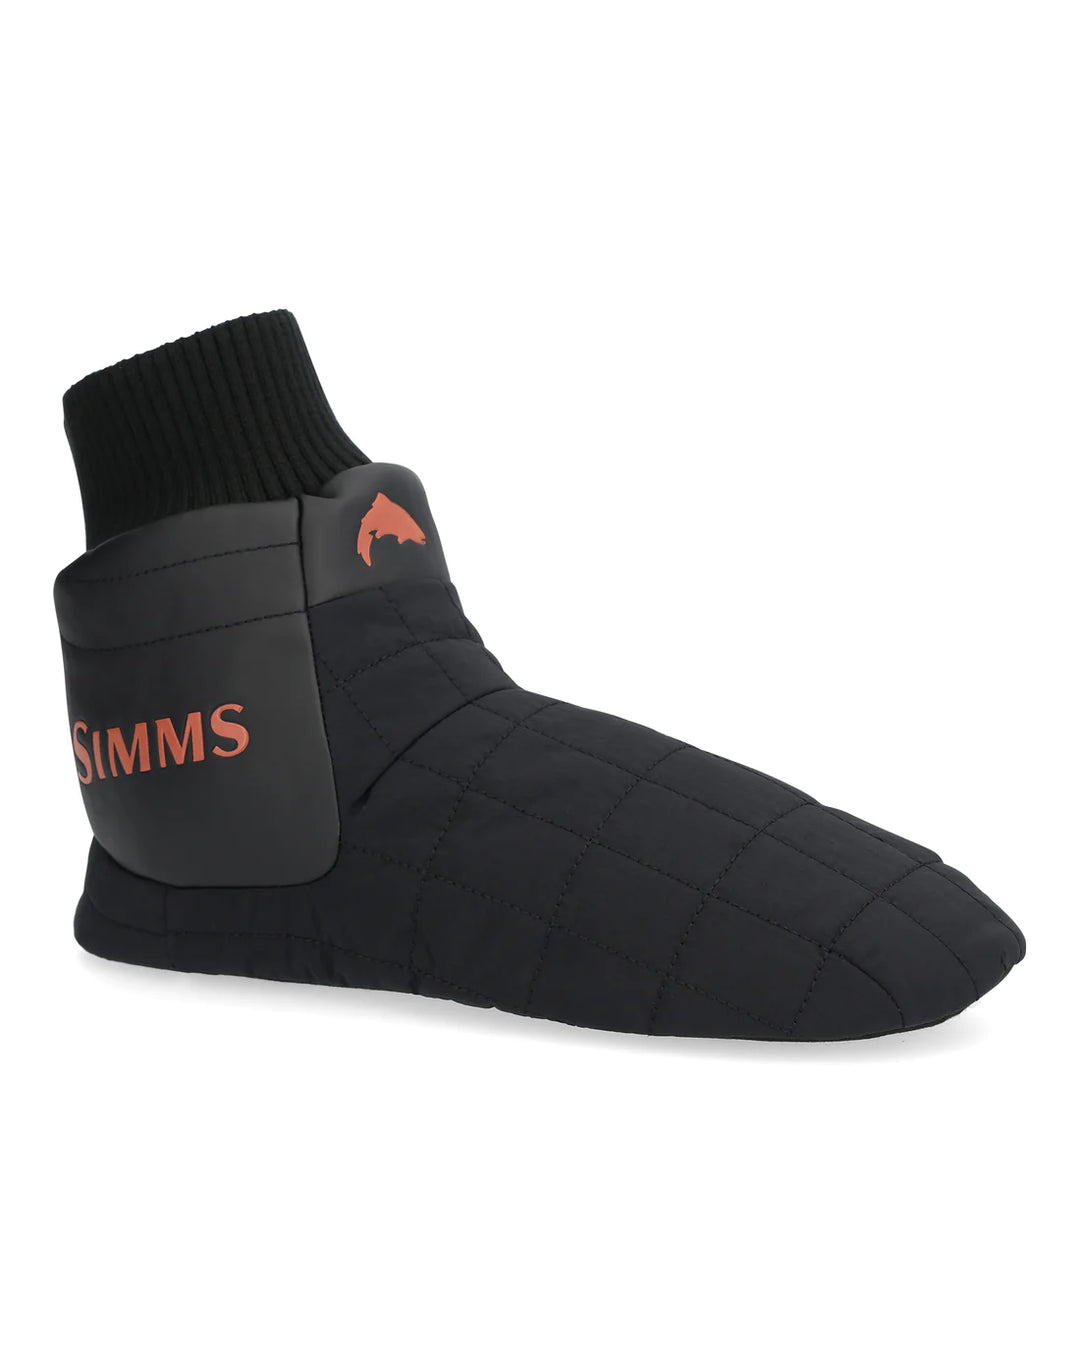 Simms - Bulkley Insulated Bootie